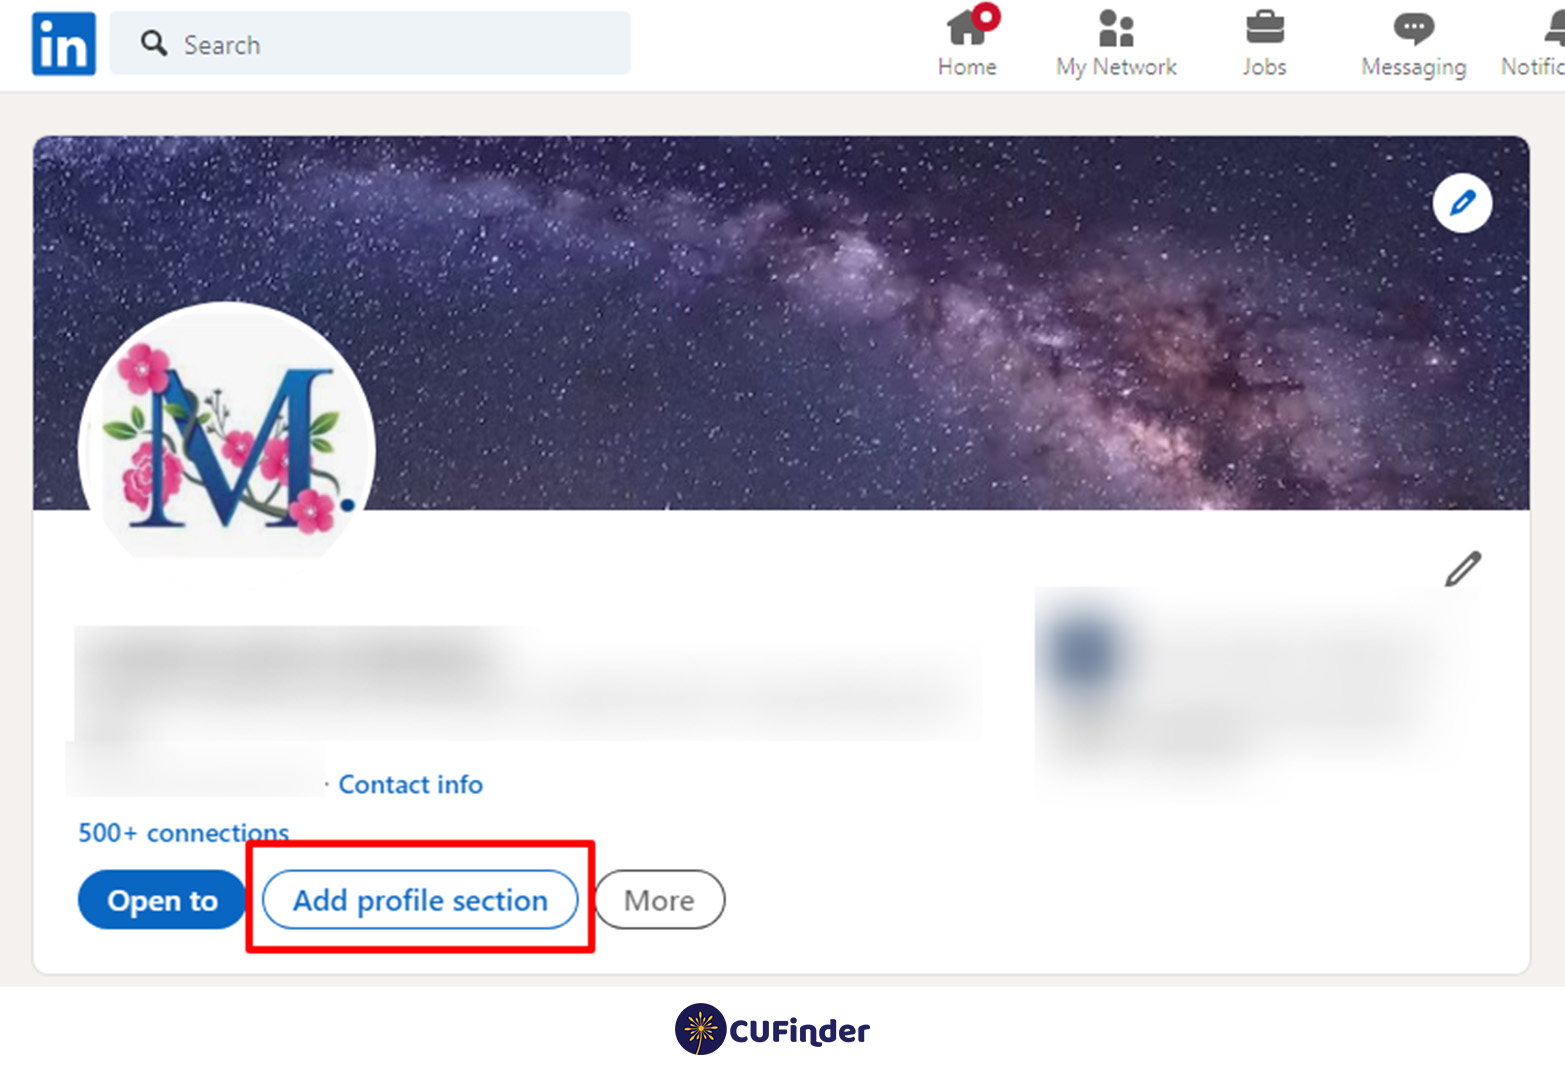 on your profile page, click the “Add Profile Section” button located just below your profile picture